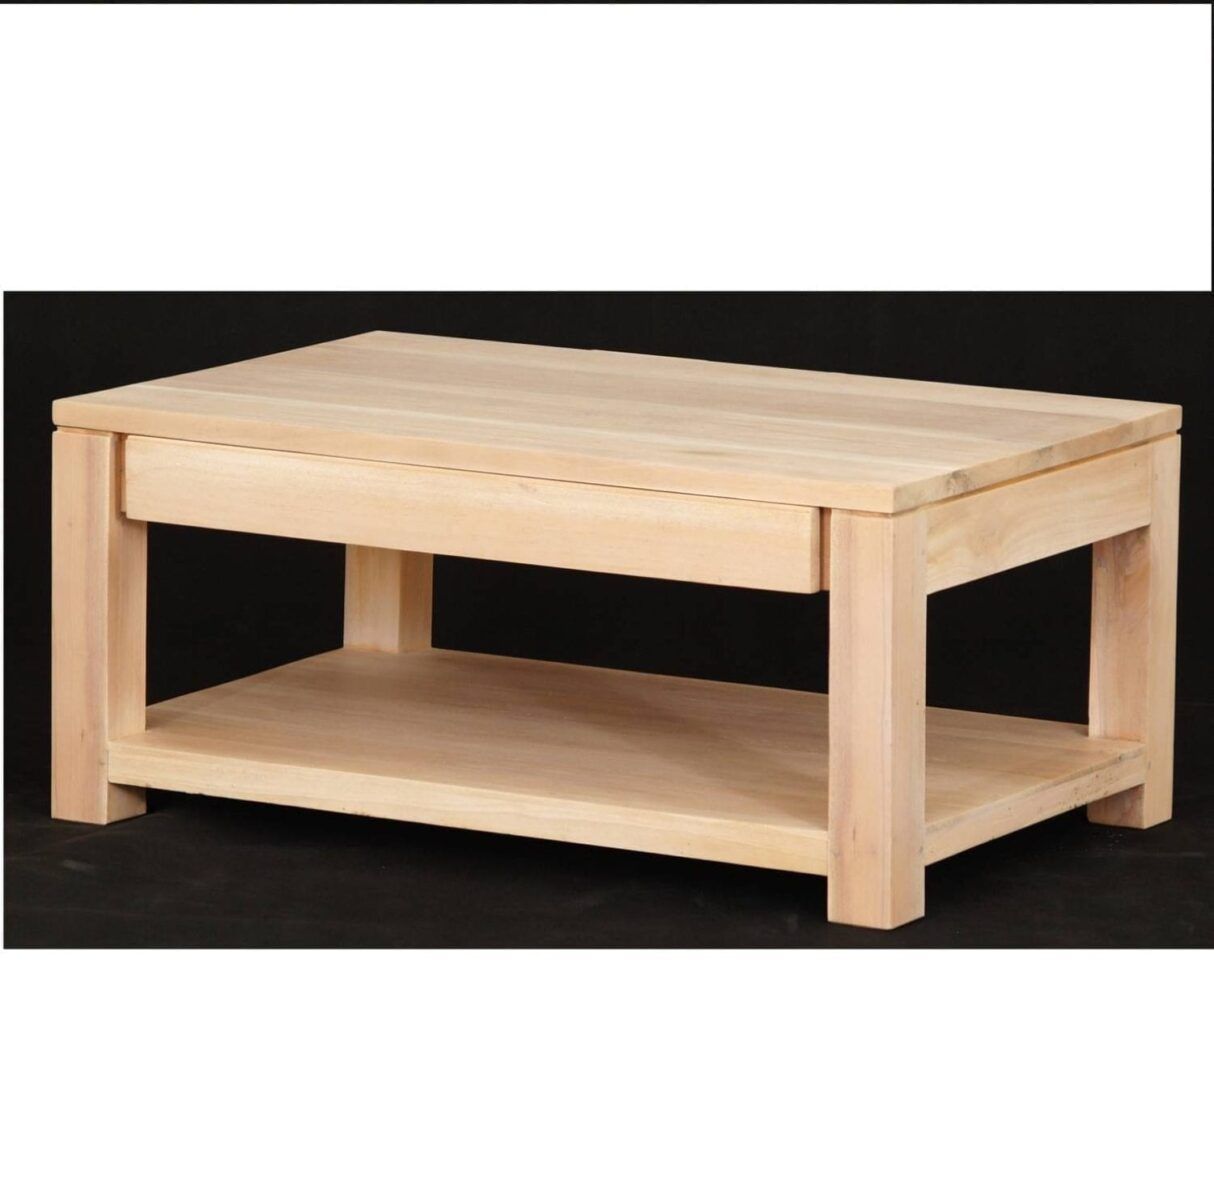 Amsterdam Coffee Table 1 Drawer 1 Shelf White Wash – One Throughout 1 Shelf Coffee Tables (View 4 of 15)